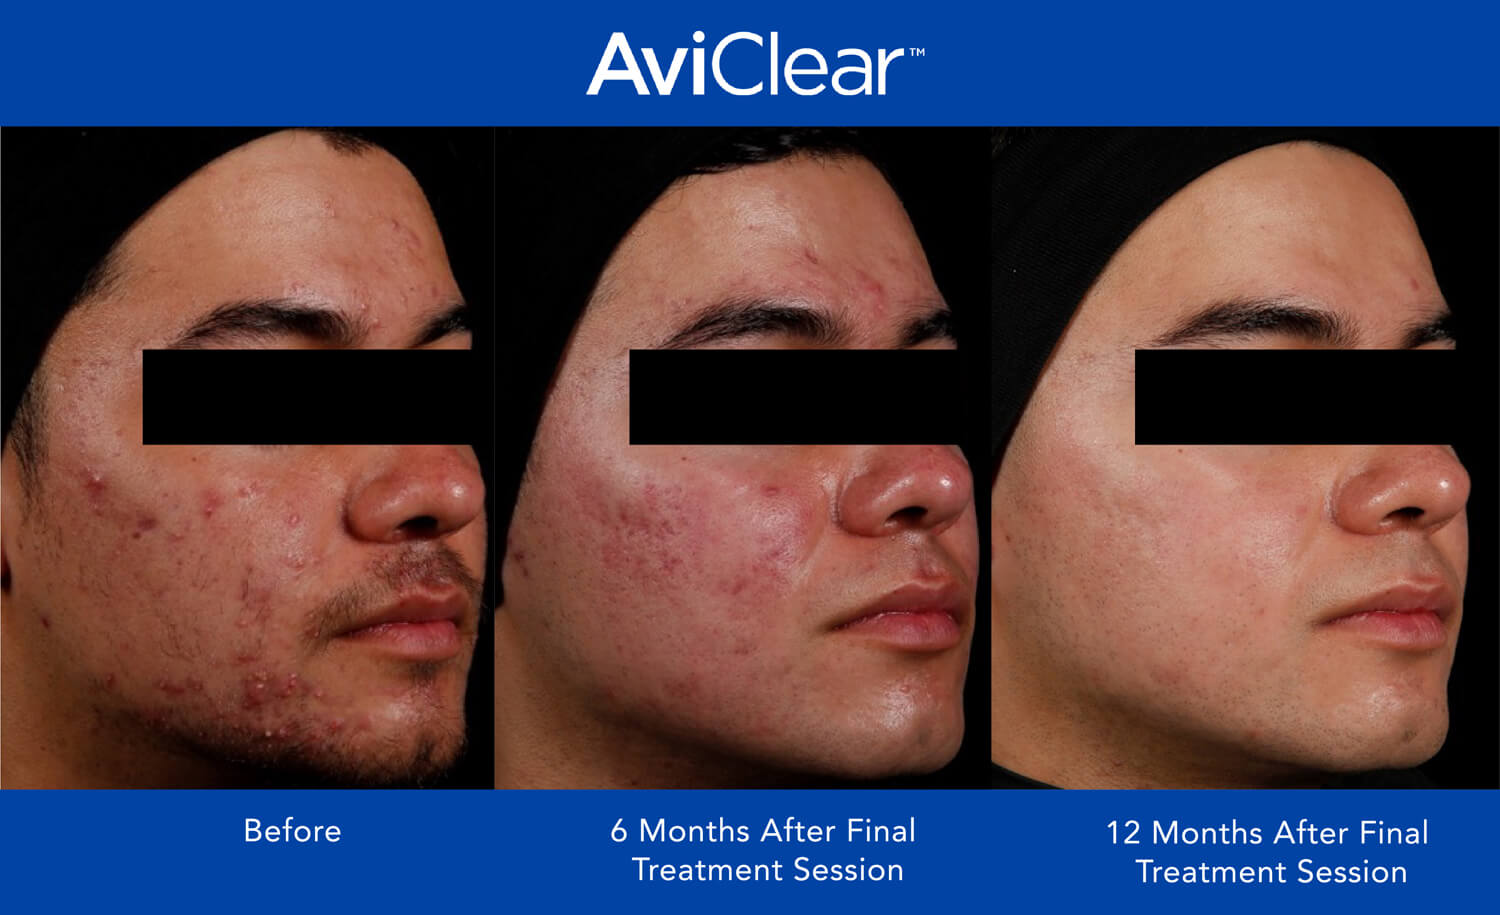 AviClear before and after photos showing remarkable acne improvement after 12 months.